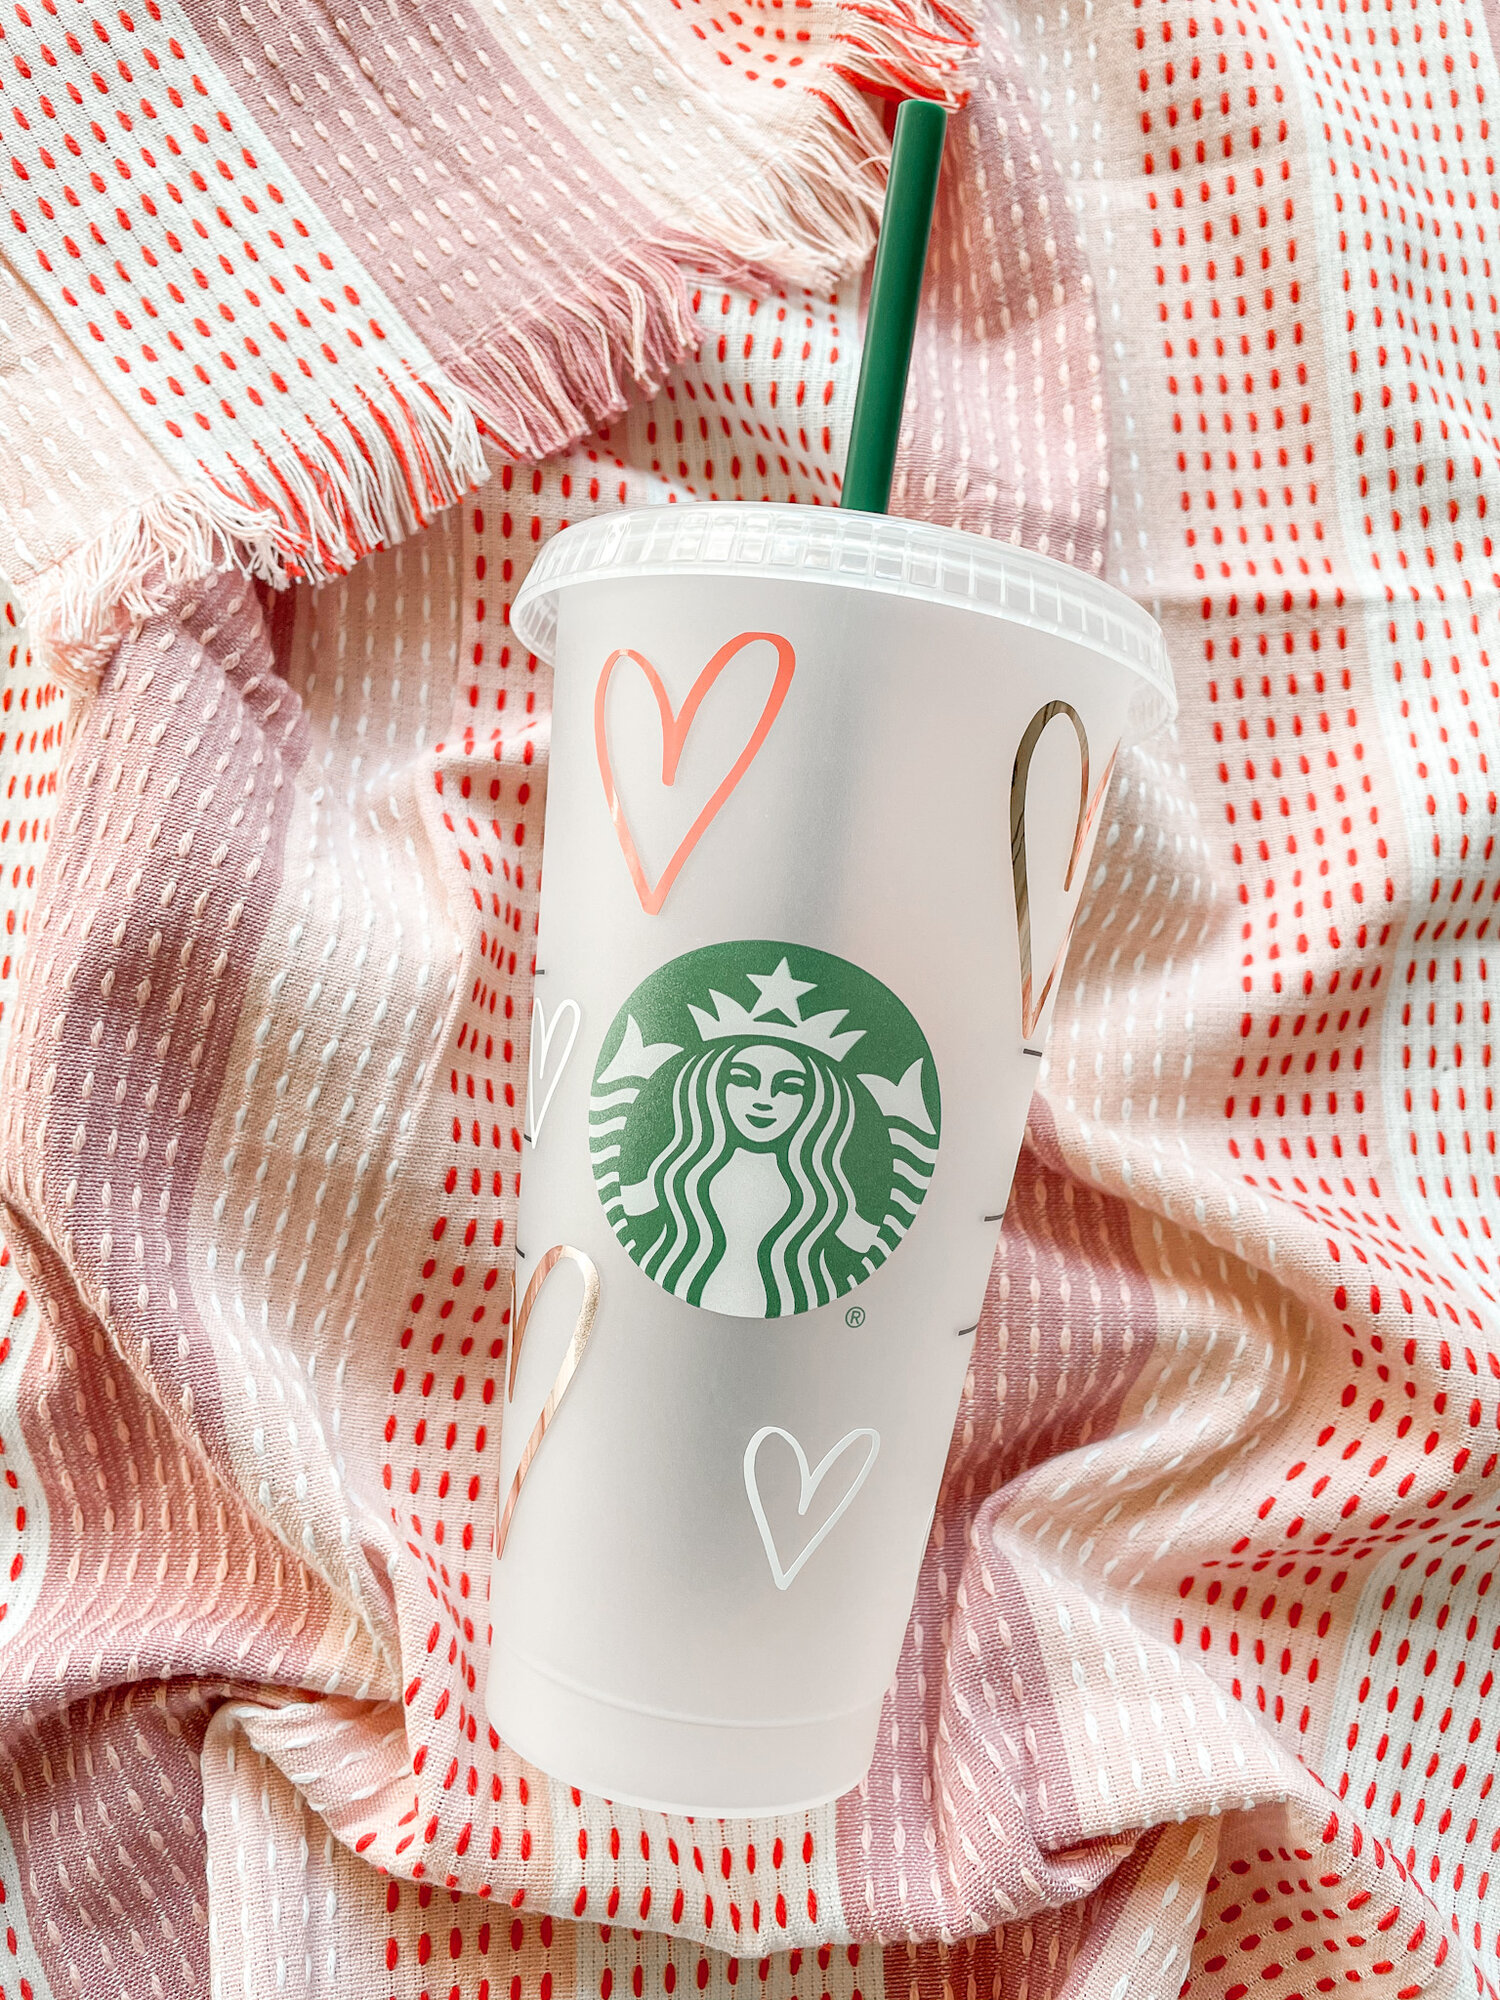 How to Make a Starbucks Cold Cup Wrap [with FREE Template]